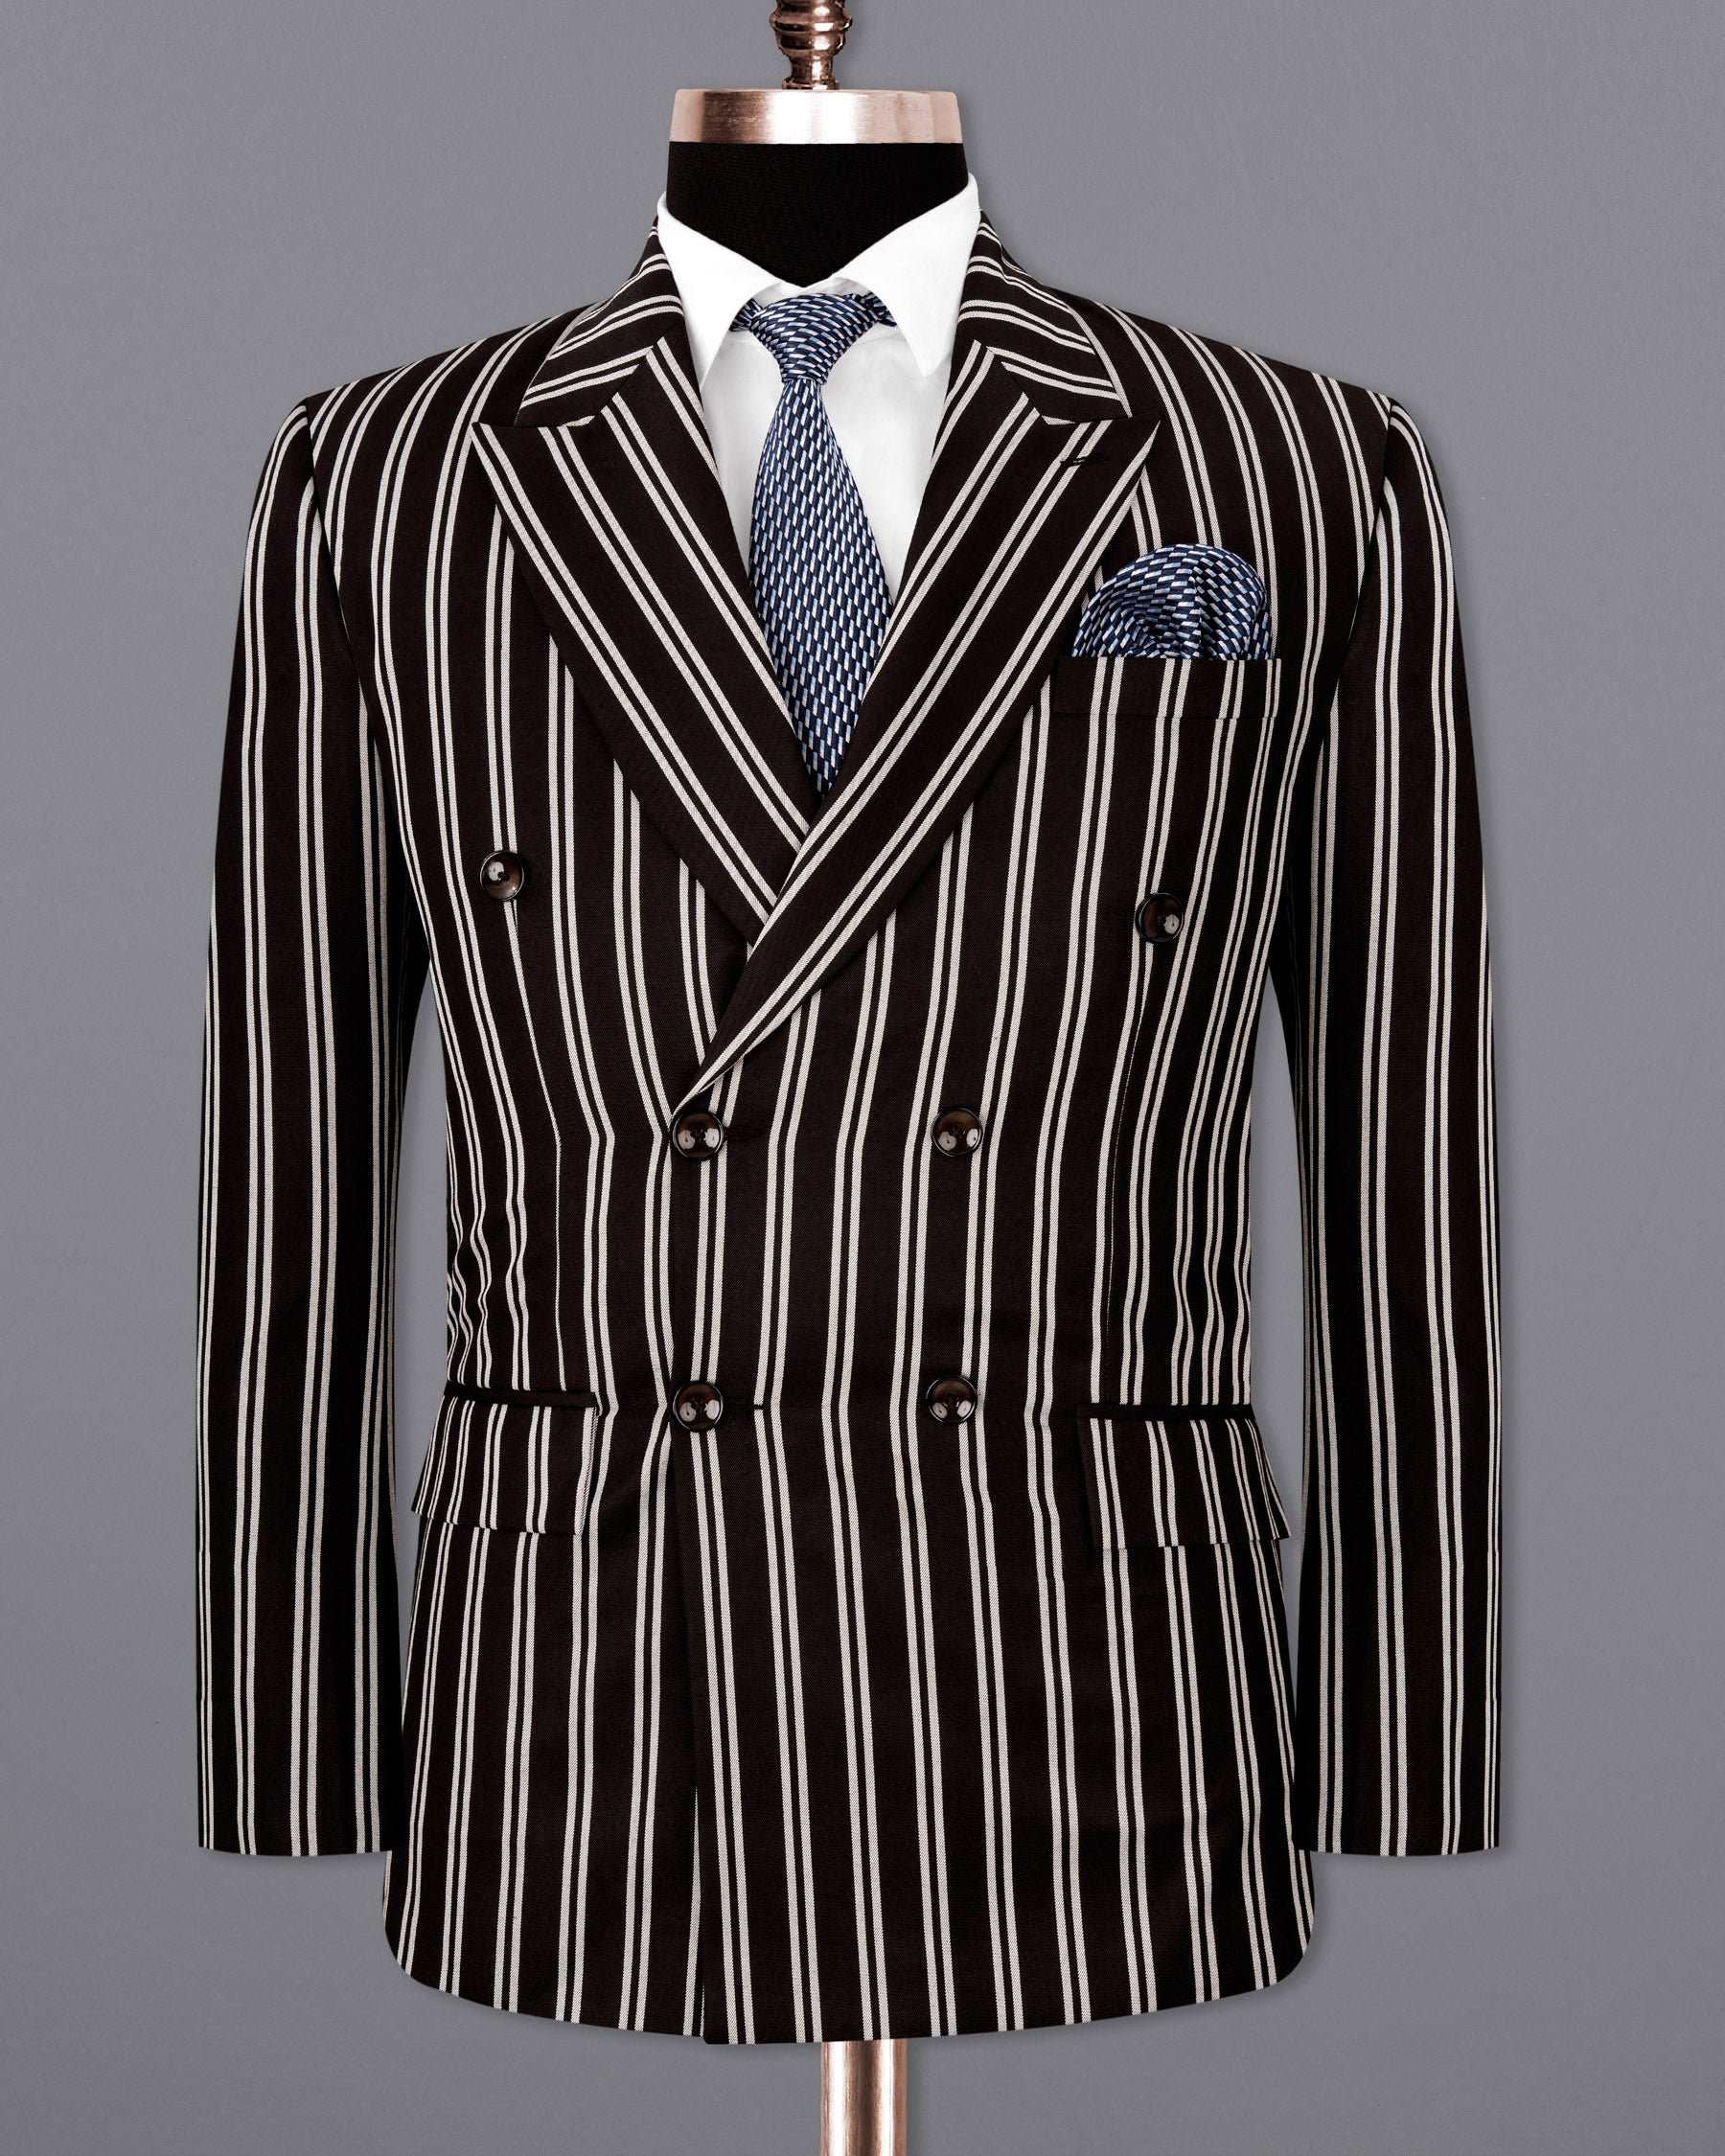 Jade Black Striped Double Breasted Suit ST1727-DB-36, ST1727-DB-38, ST1727-DB-40, ST1727-DB-42, ST1727-DB-44, ST1727-DB-46, ST1727-DB-48, ST1727-DB-50, ST1727-DB-52, ST1727-DB-54, ST1727-DB-56, ST1727-DB-58, ST1727-DB-60